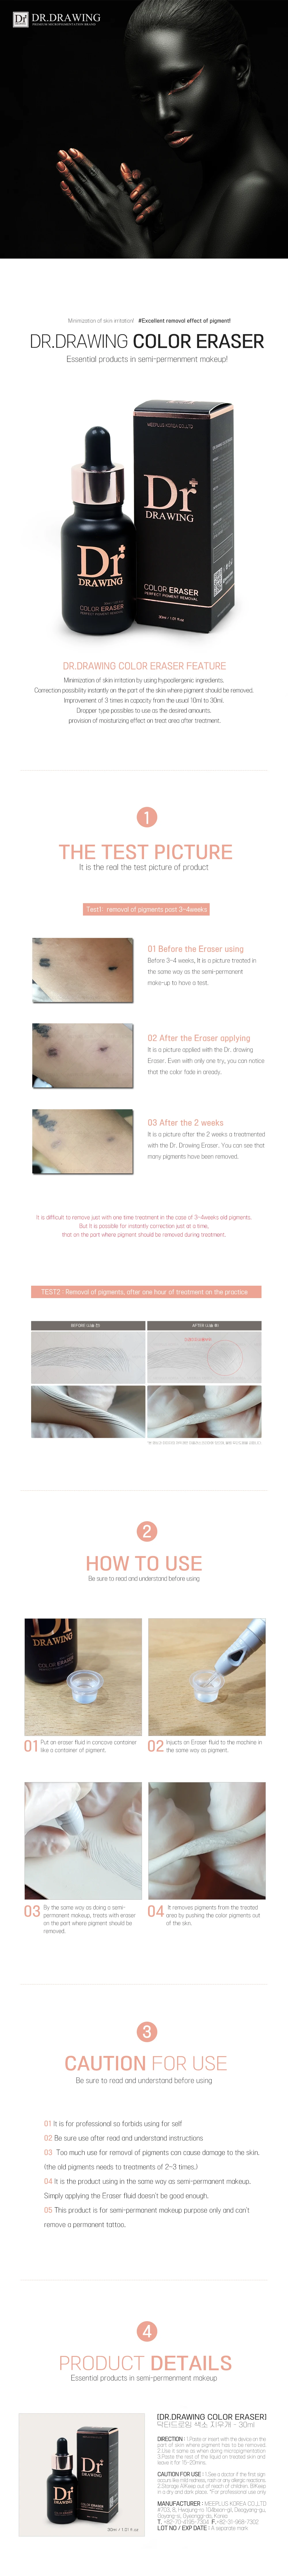 Best and Safe Tattoo Pigment Remover Dr.Drawing micro pigmentation Eraser Made by Best Manufacture in Korea